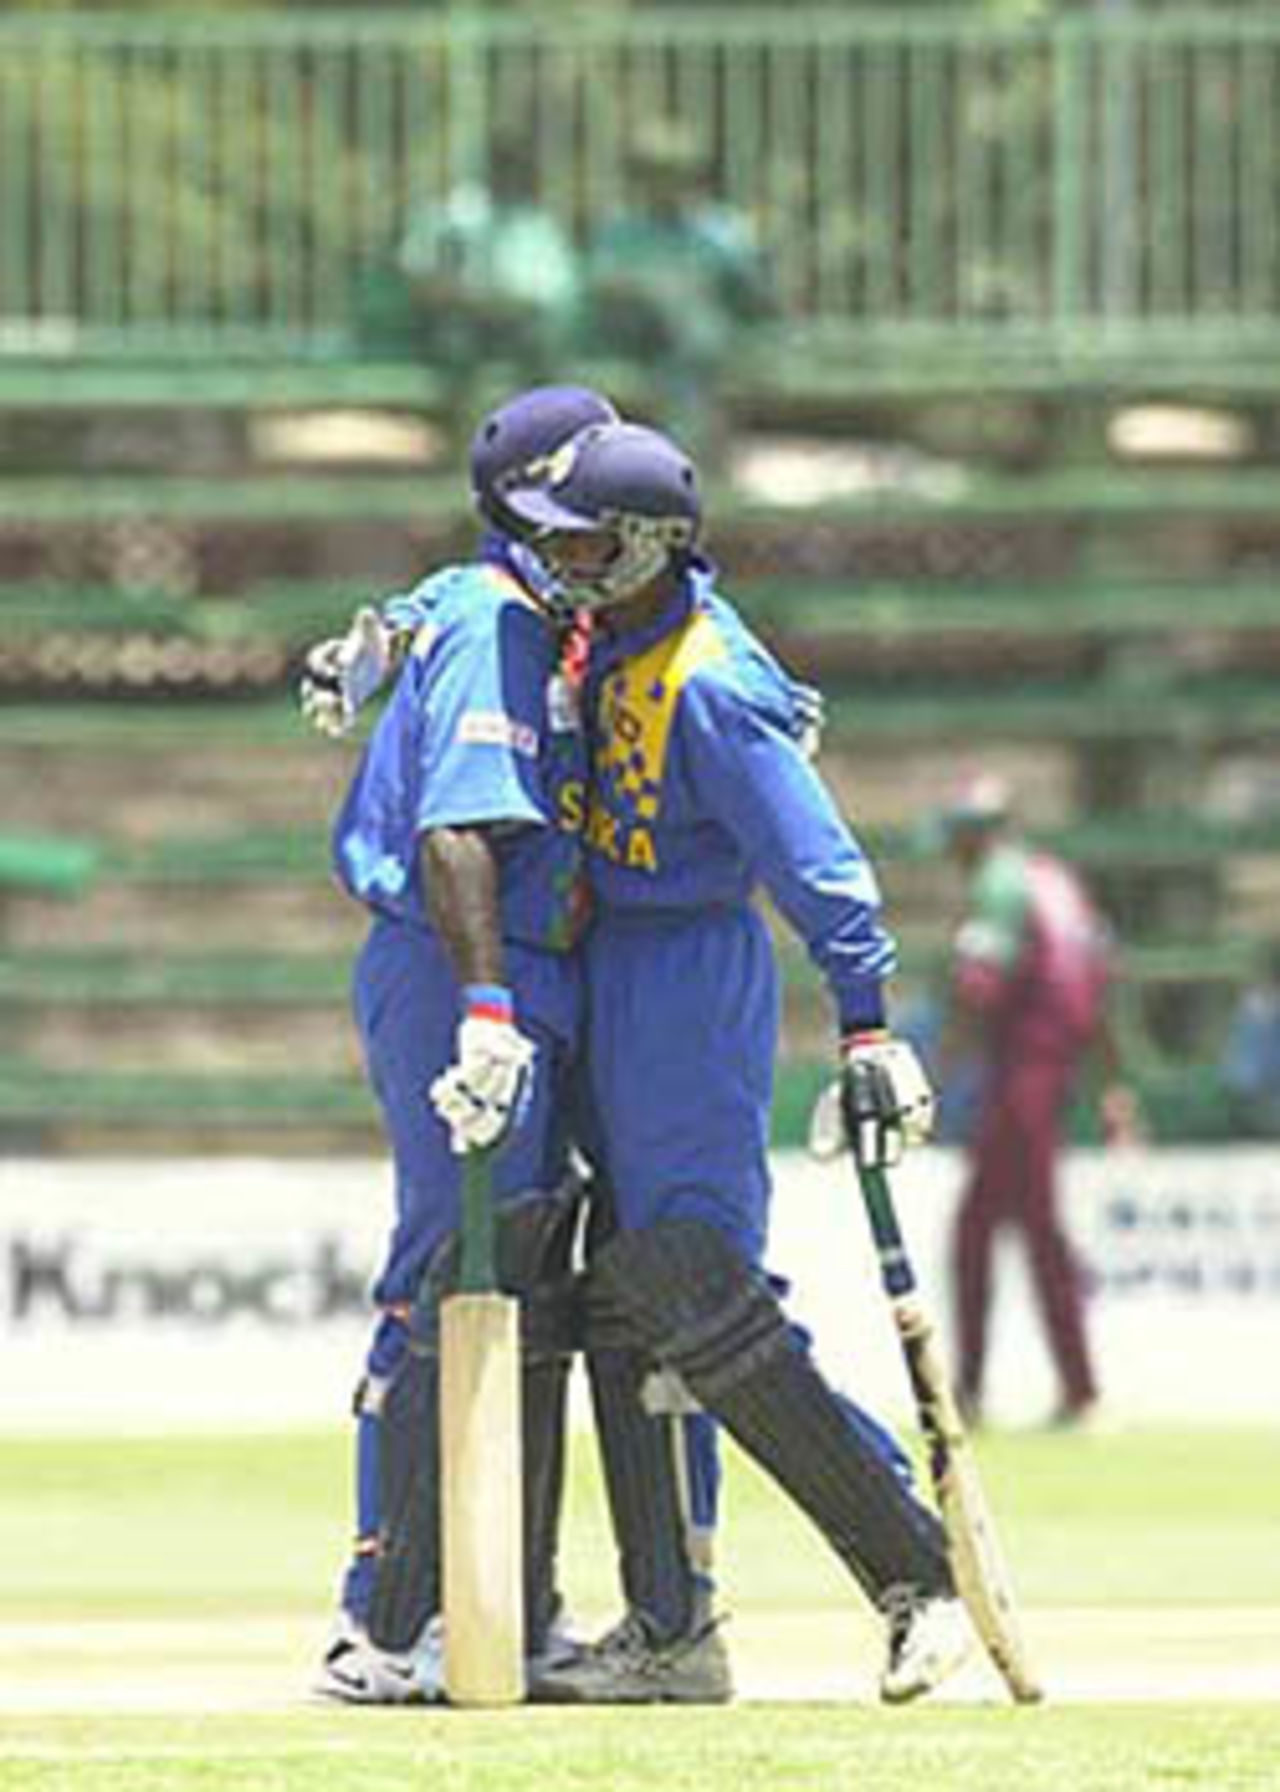 Gunawardene being congratulated on his century by Russel Arnold, ICC KnockOut, 2000/01, 2nd Preliminary Quarter Final, Sri Lanka v West Indies, Gymkhana Club Ground, Nairobi, 04 October 2000.